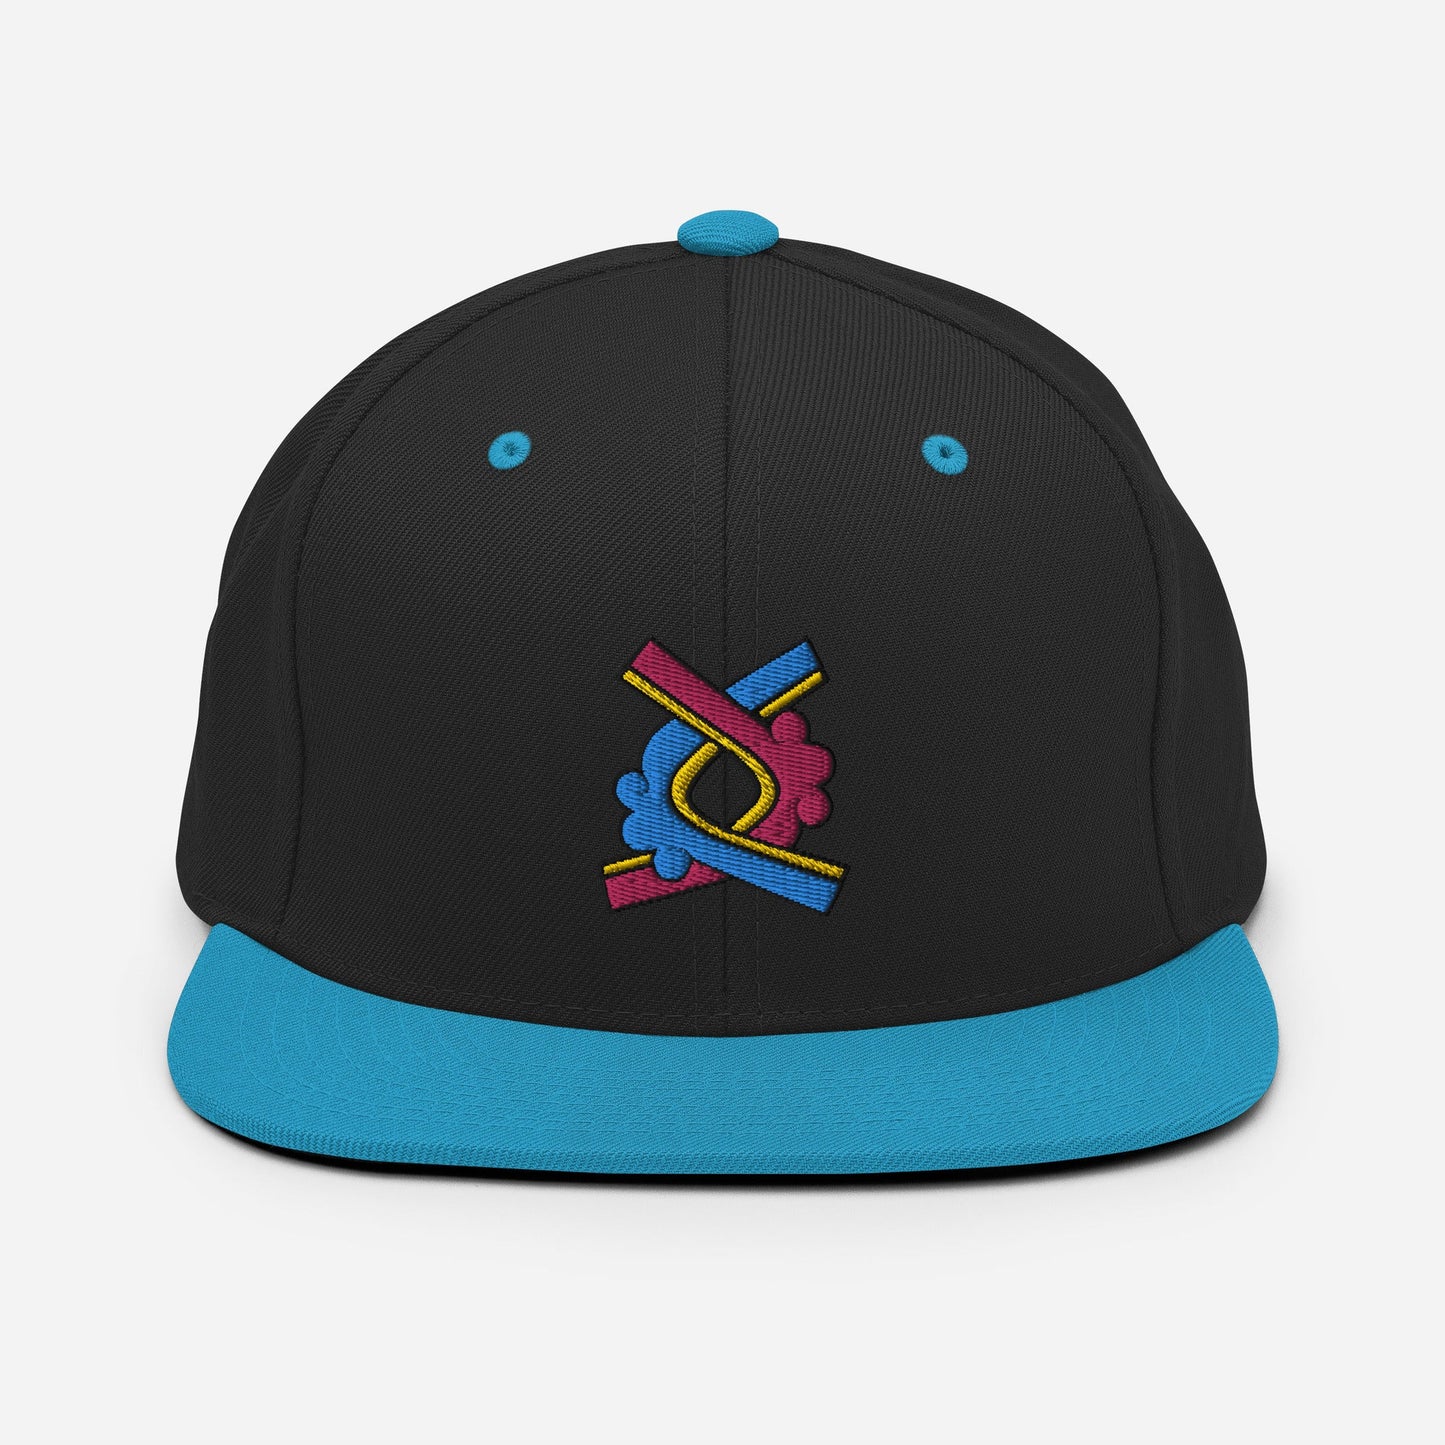 Ollin (Bright Colorway) - Embroidered Snapback Hat